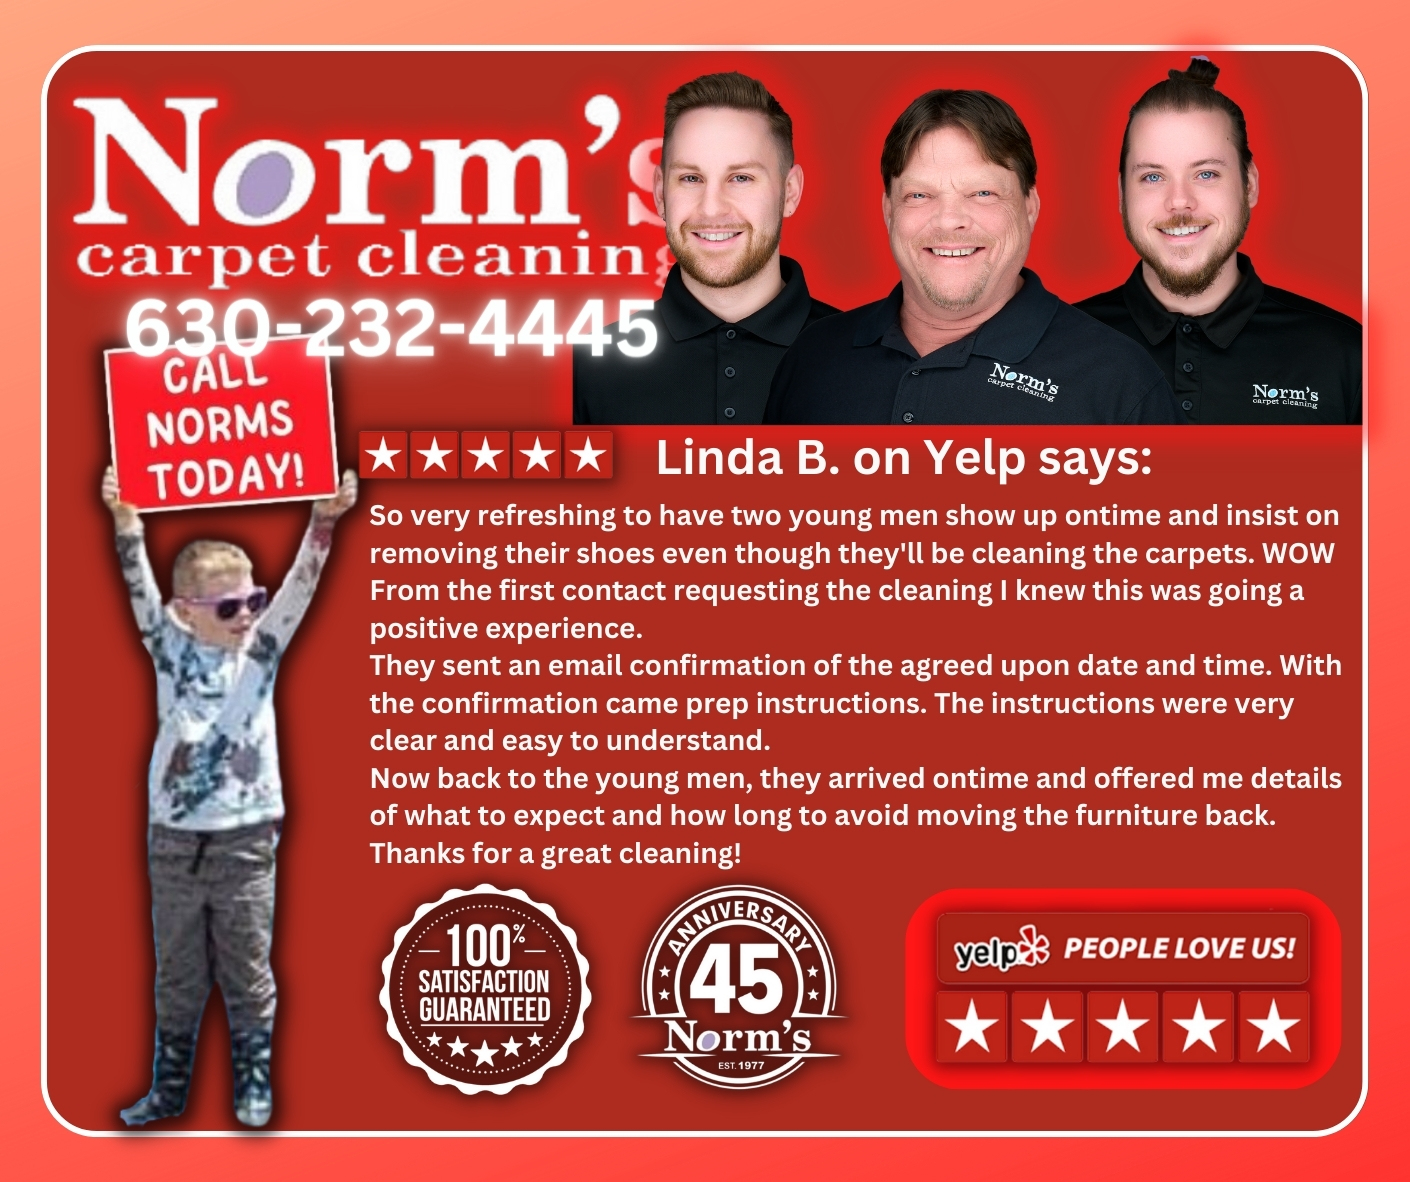 Geneva Carpet Cleaning Professional 5 Star Review